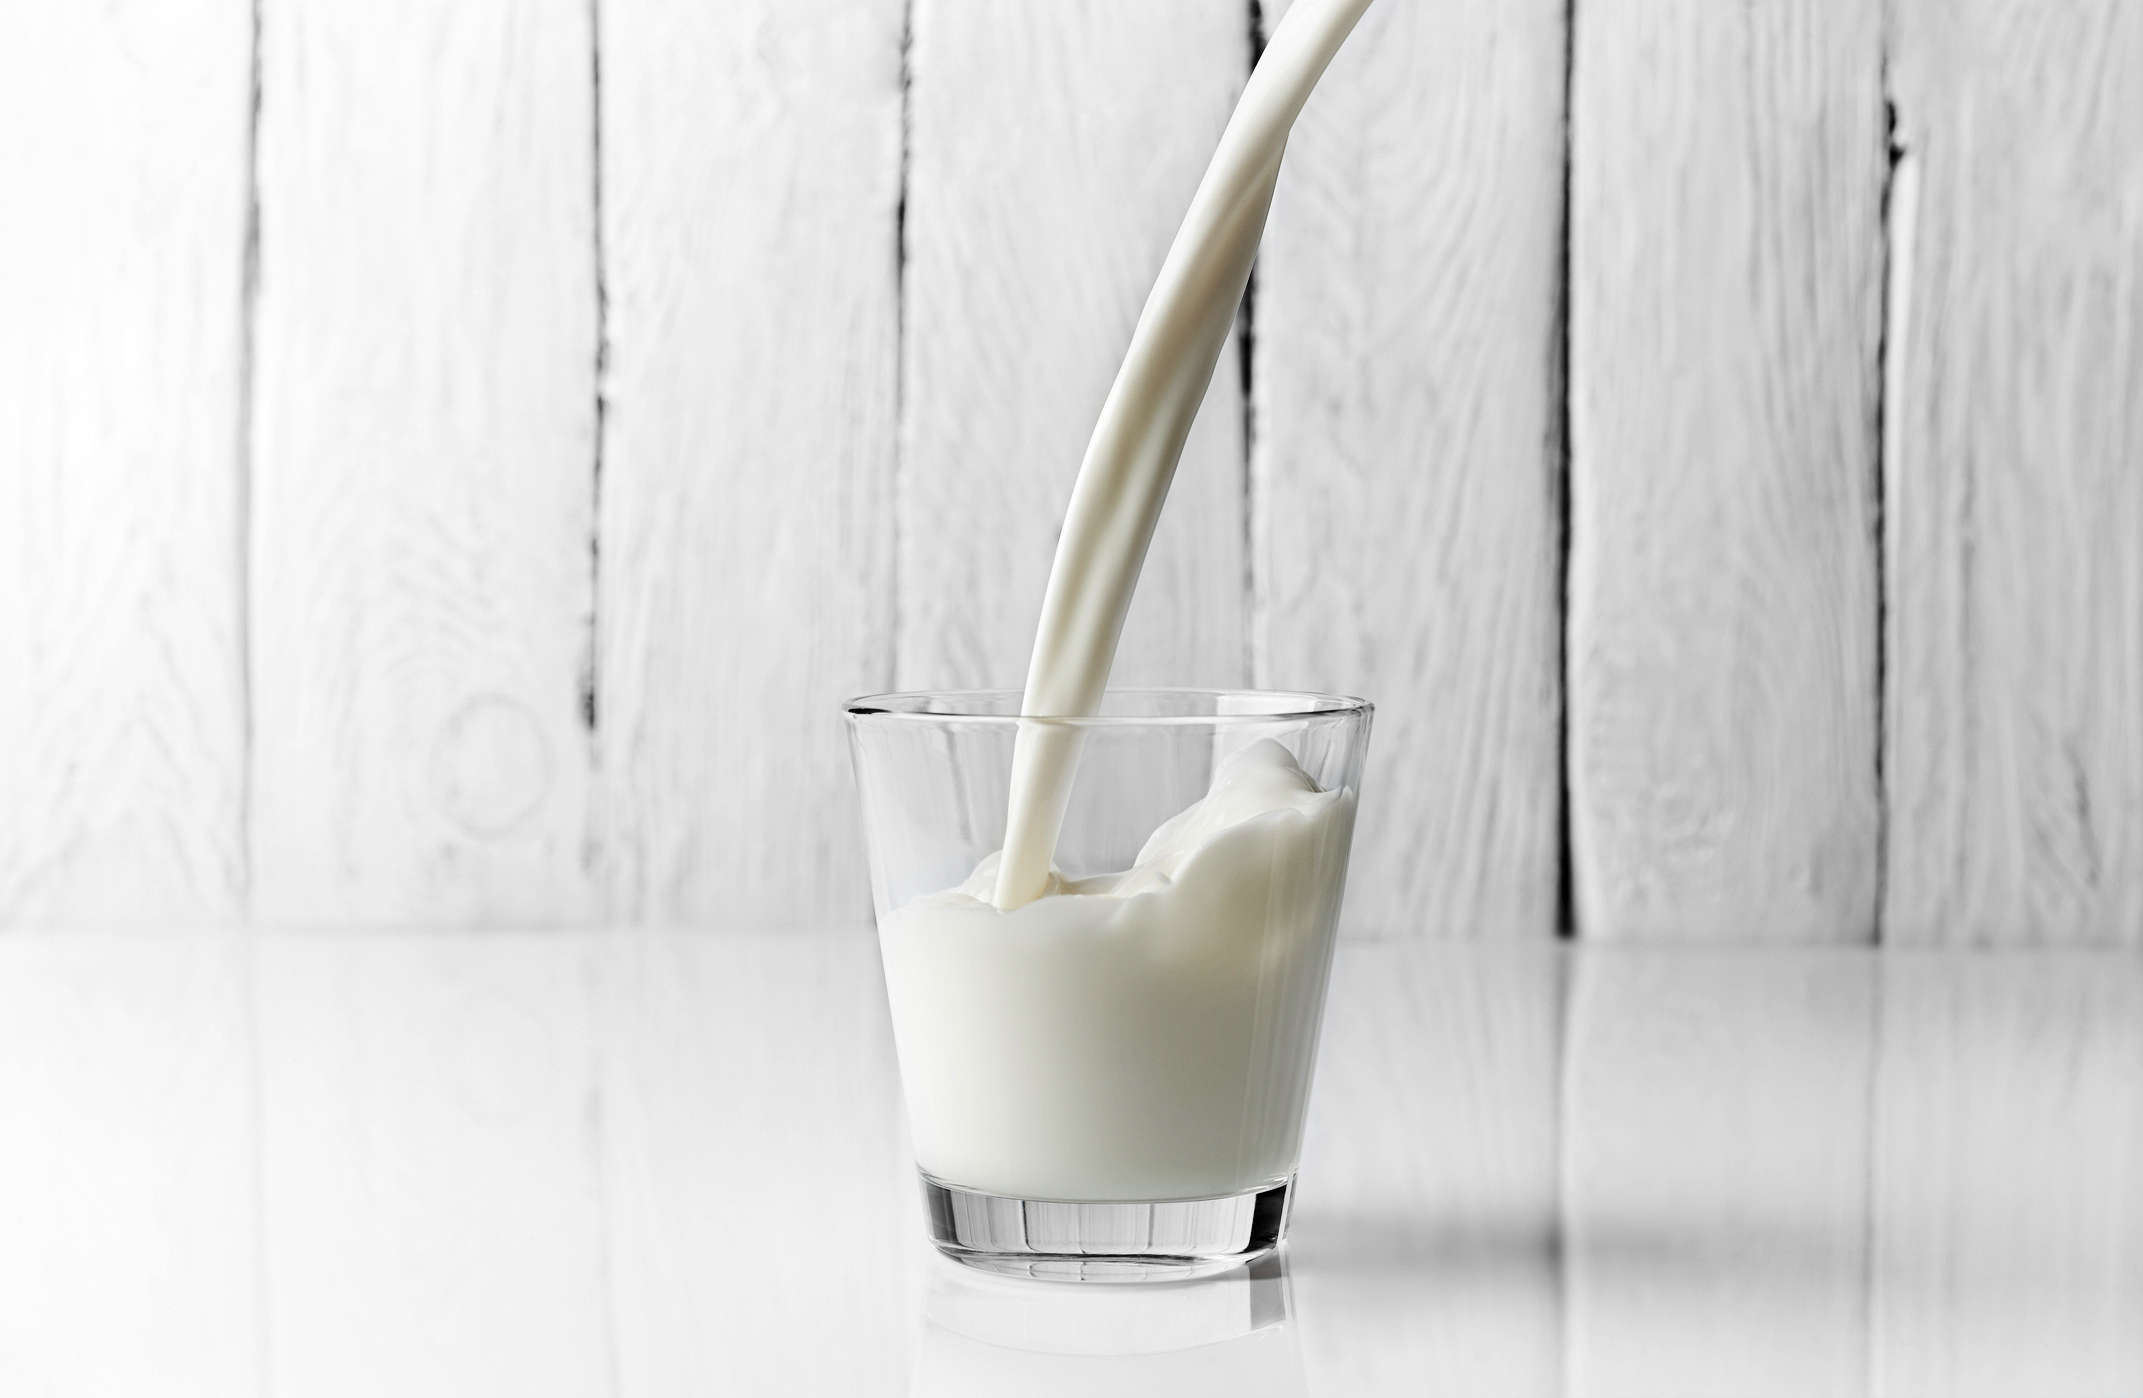 Milk being poured into a glass in front of a white wooden background.